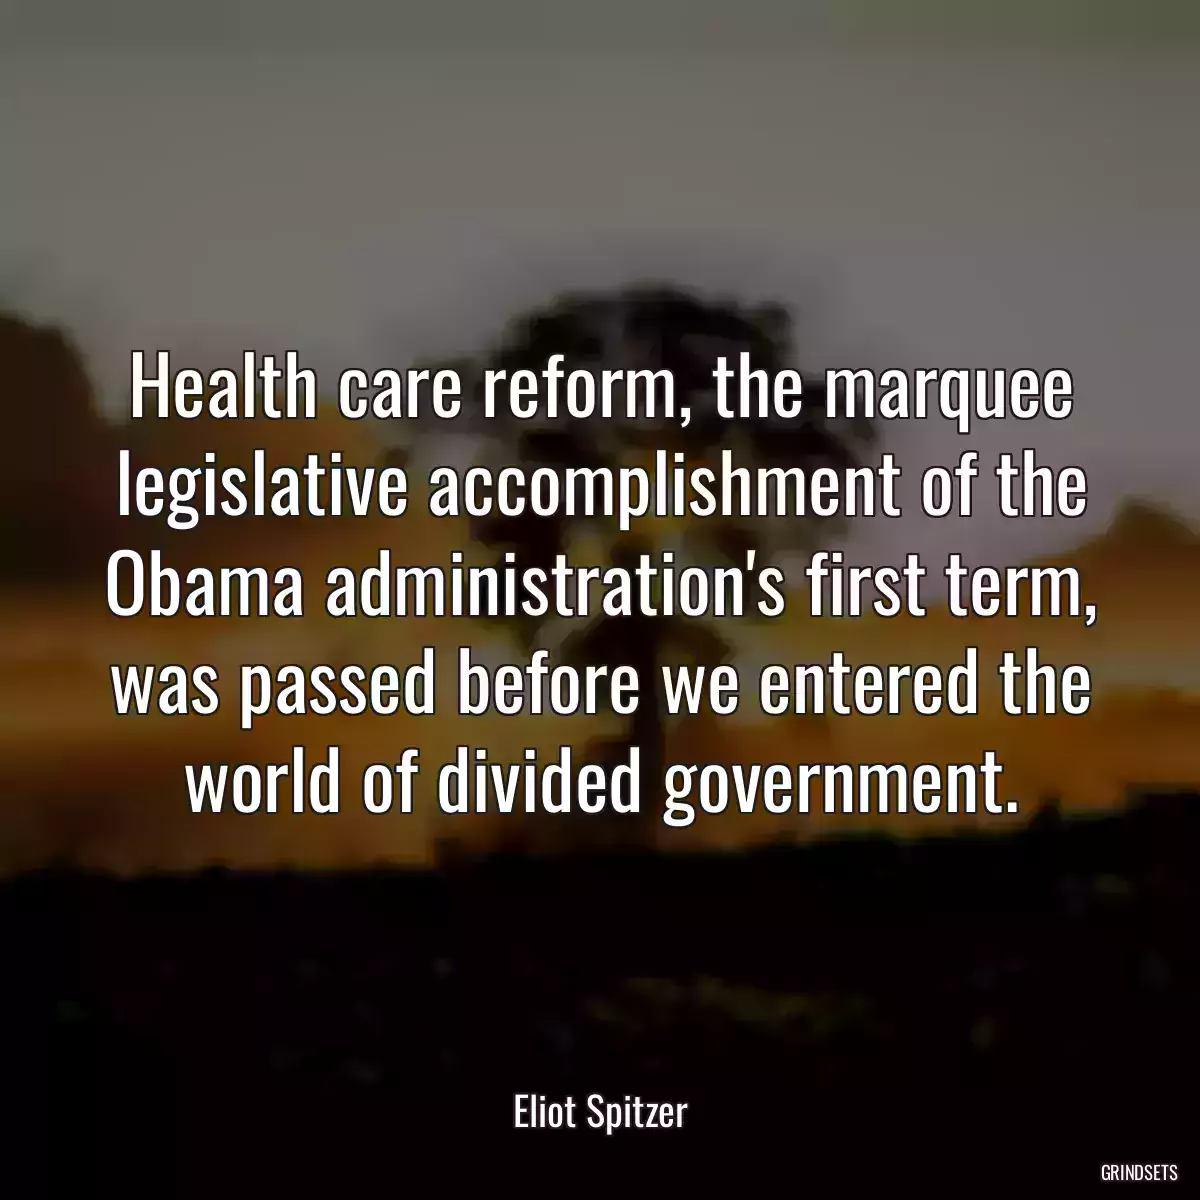 Health care reform, the marquee legislative accomplishment of the Obama administration\'s first term, was passed before we entered the world of divided government.